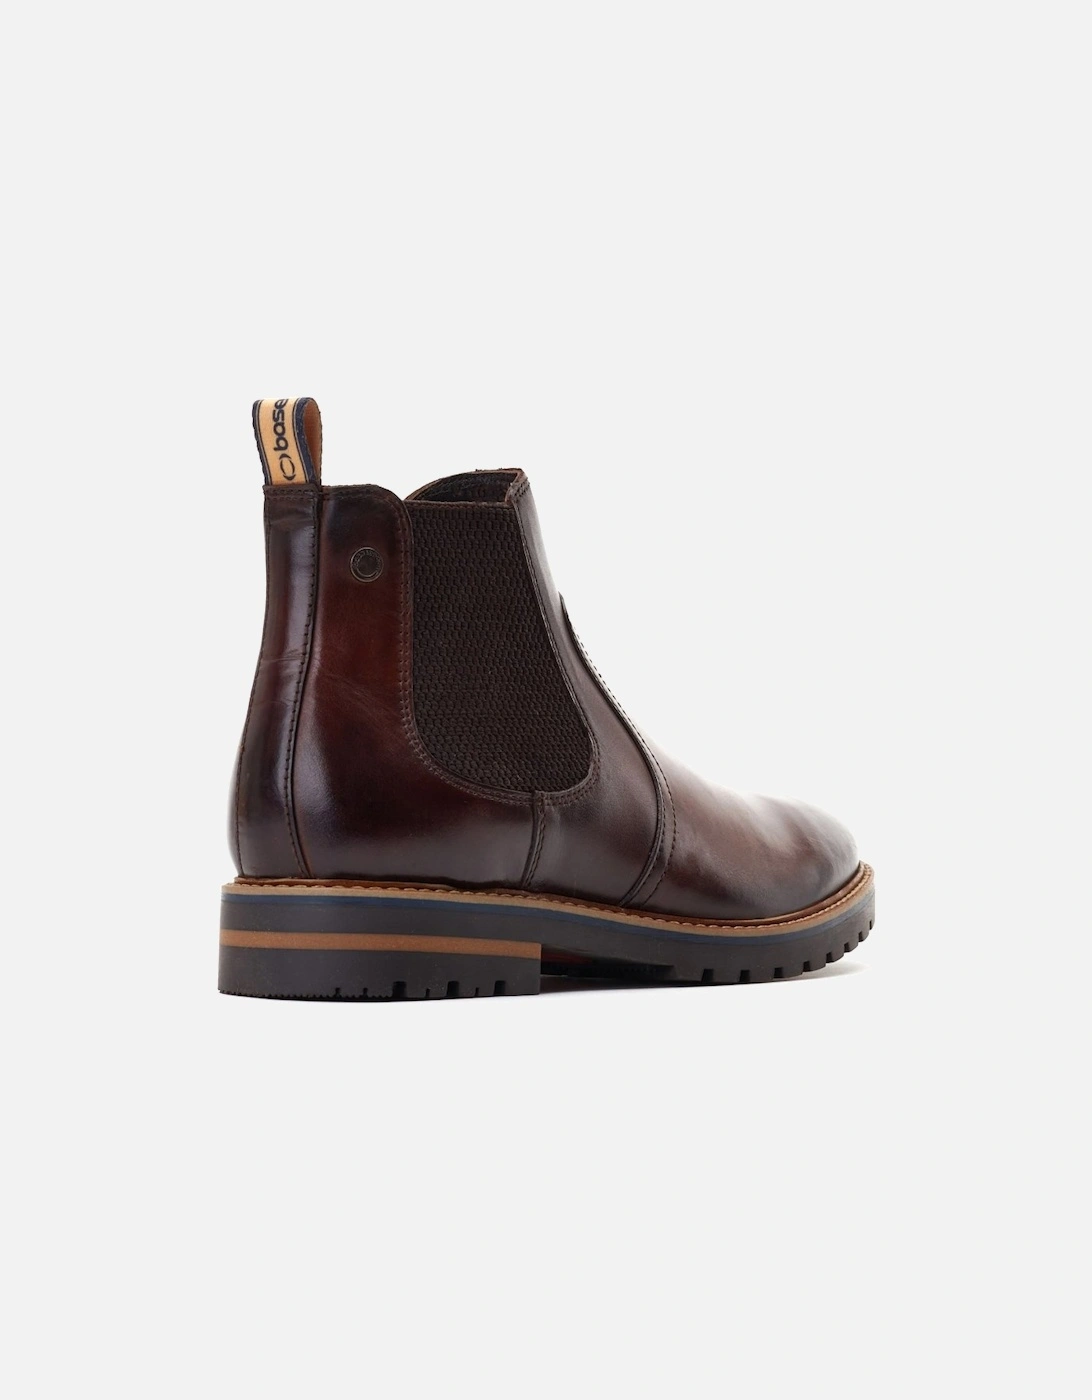 Cutler Washed Mens Chelsea Boots